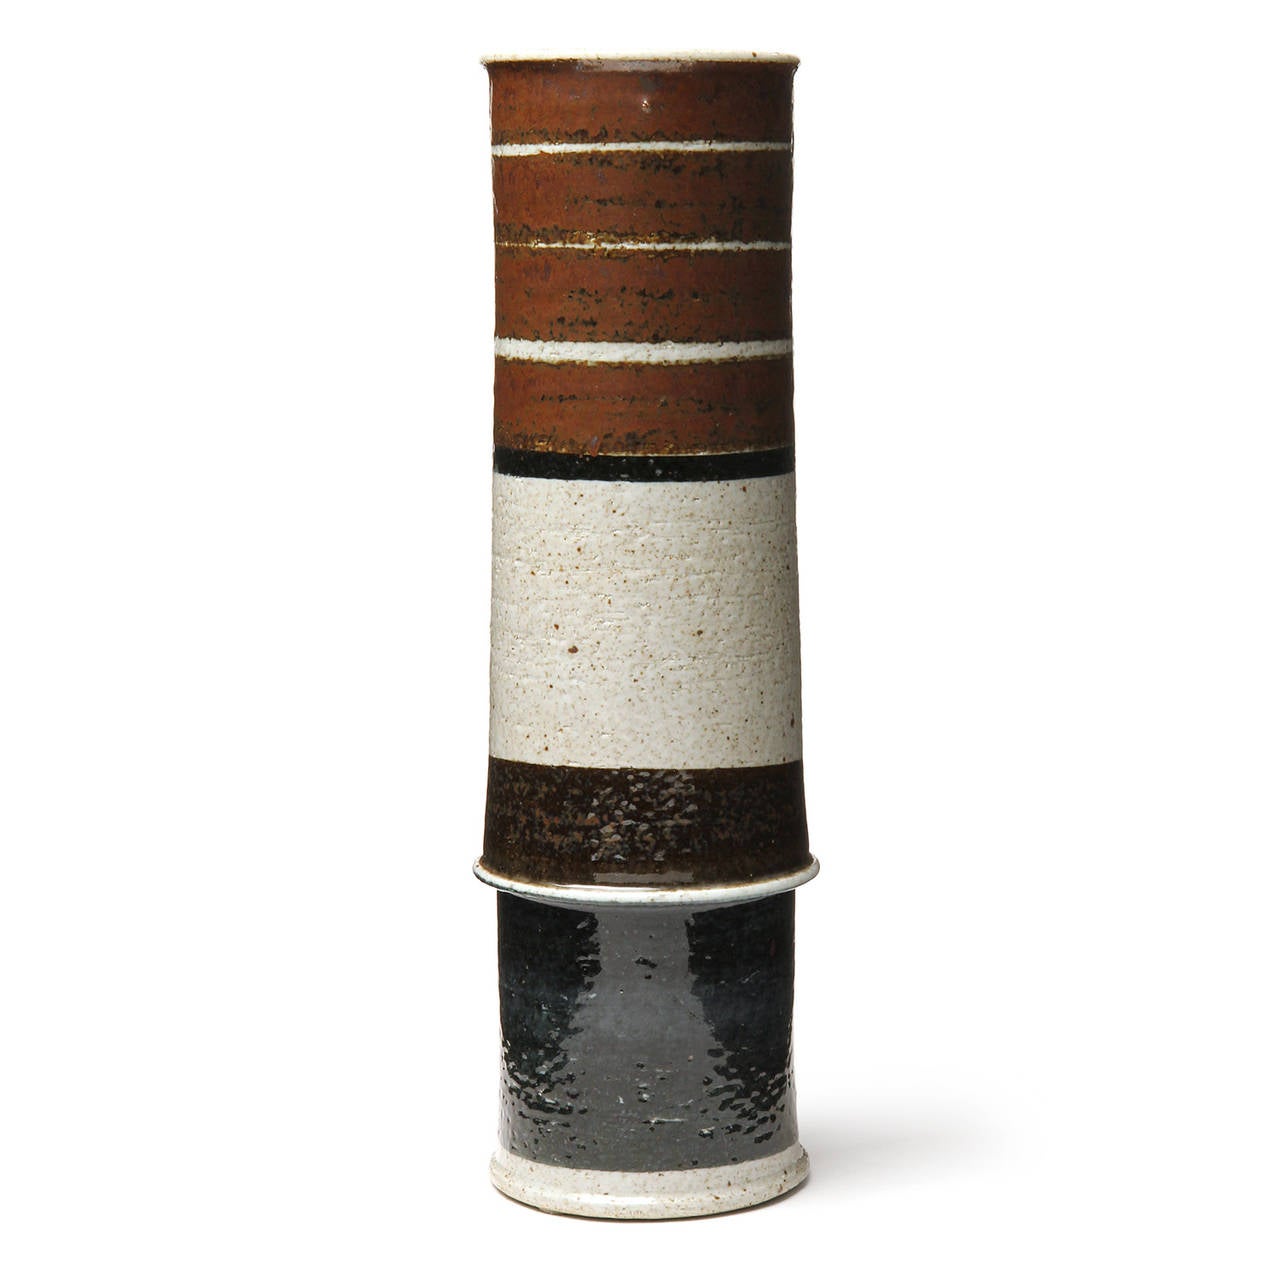 A substantial, well-scaled and impeccable unique studio stoneware vase having a tall, cylindrical and sculptural form decorated with expressive earth toned glazed bands of color.